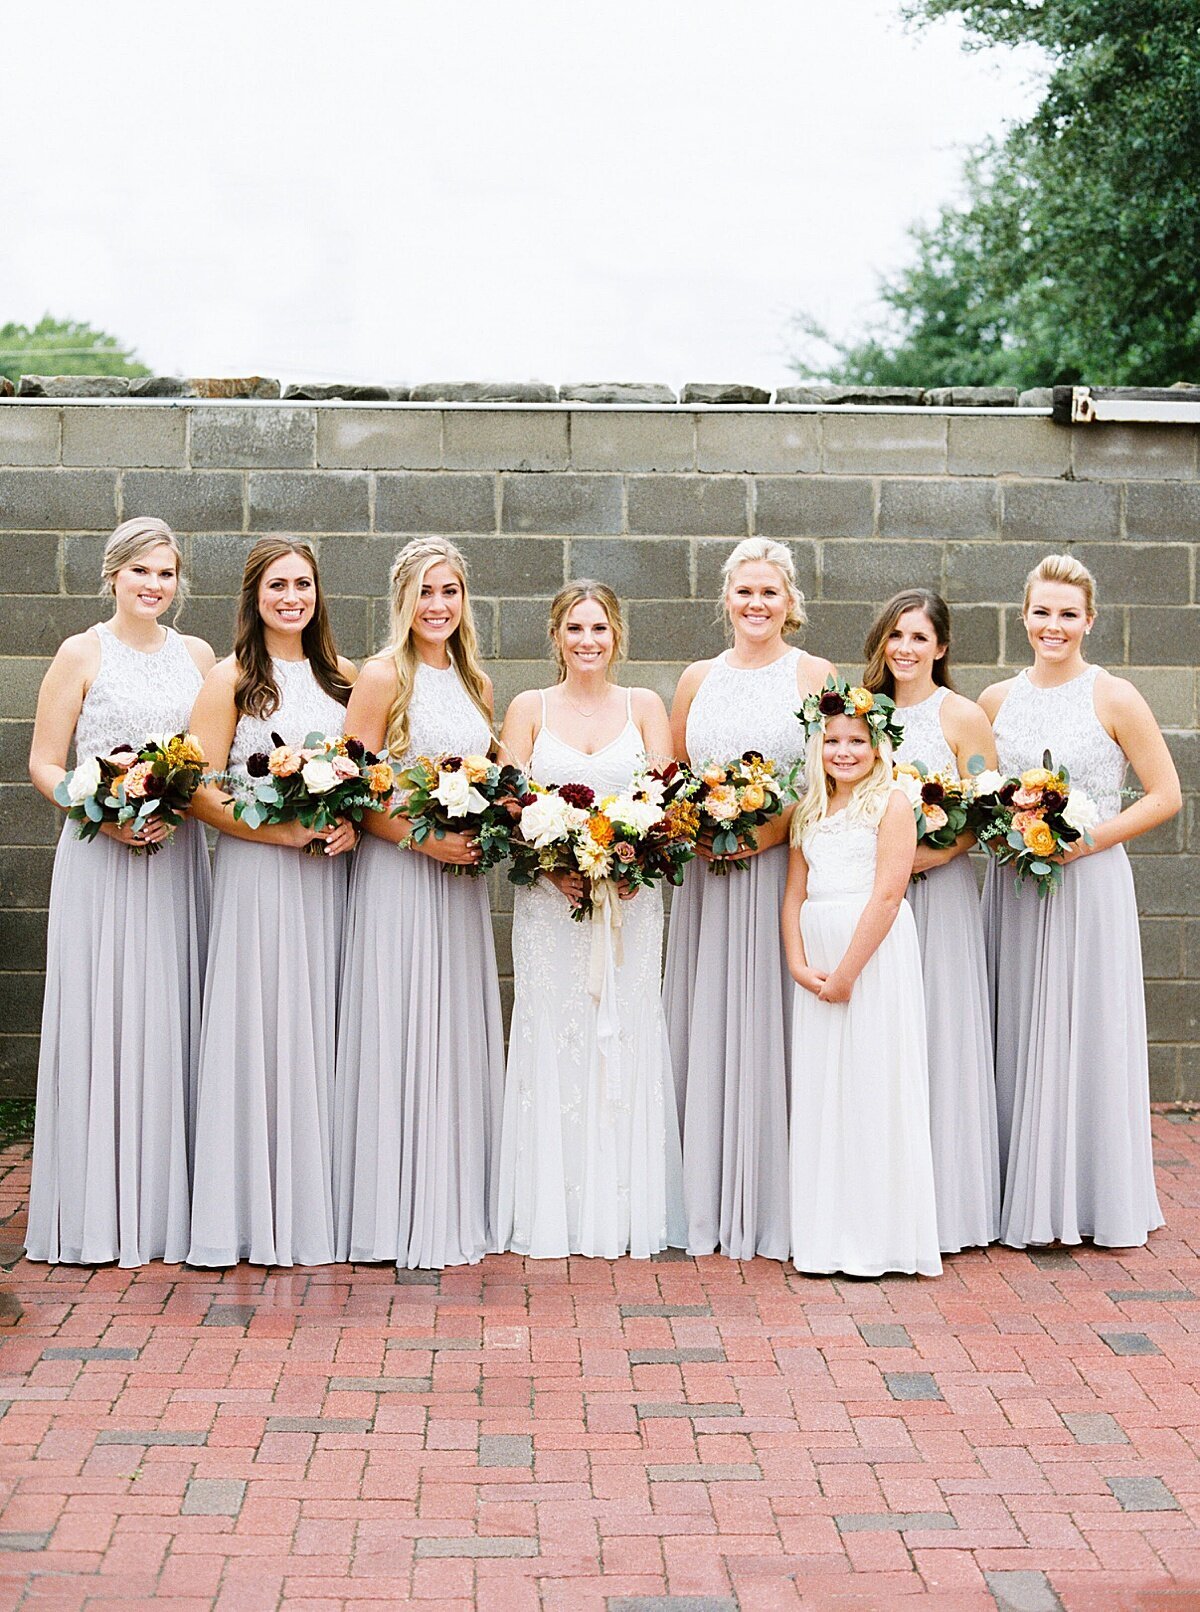 Bridesmaids with Fall floral bouquets at Mopac Event Center in Forth Worth, Texas | Vella Nest Floral Design